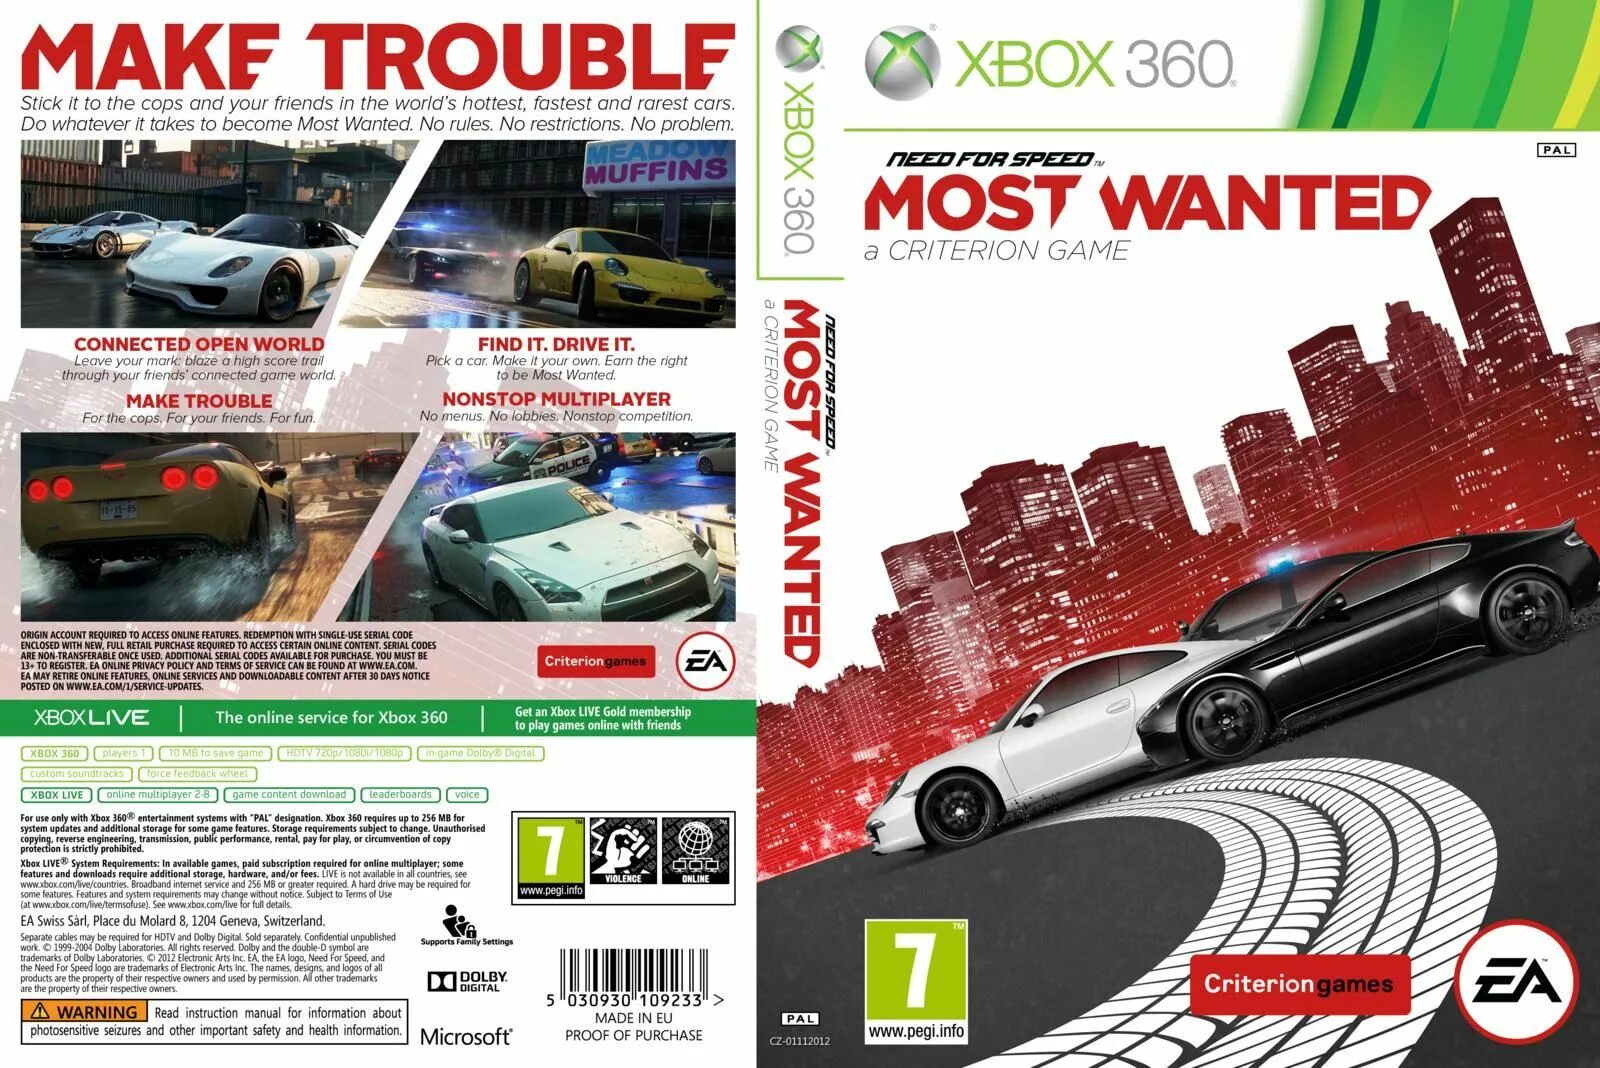 Need for Speed most wanted Xbox 360 диск. Need for Speed most wanted Xbox 360 обложка. NFS most wanted 2012 Xbox 360. Need for Speed most wanted 2005 Xbox 360. Nfs most wanted xbox